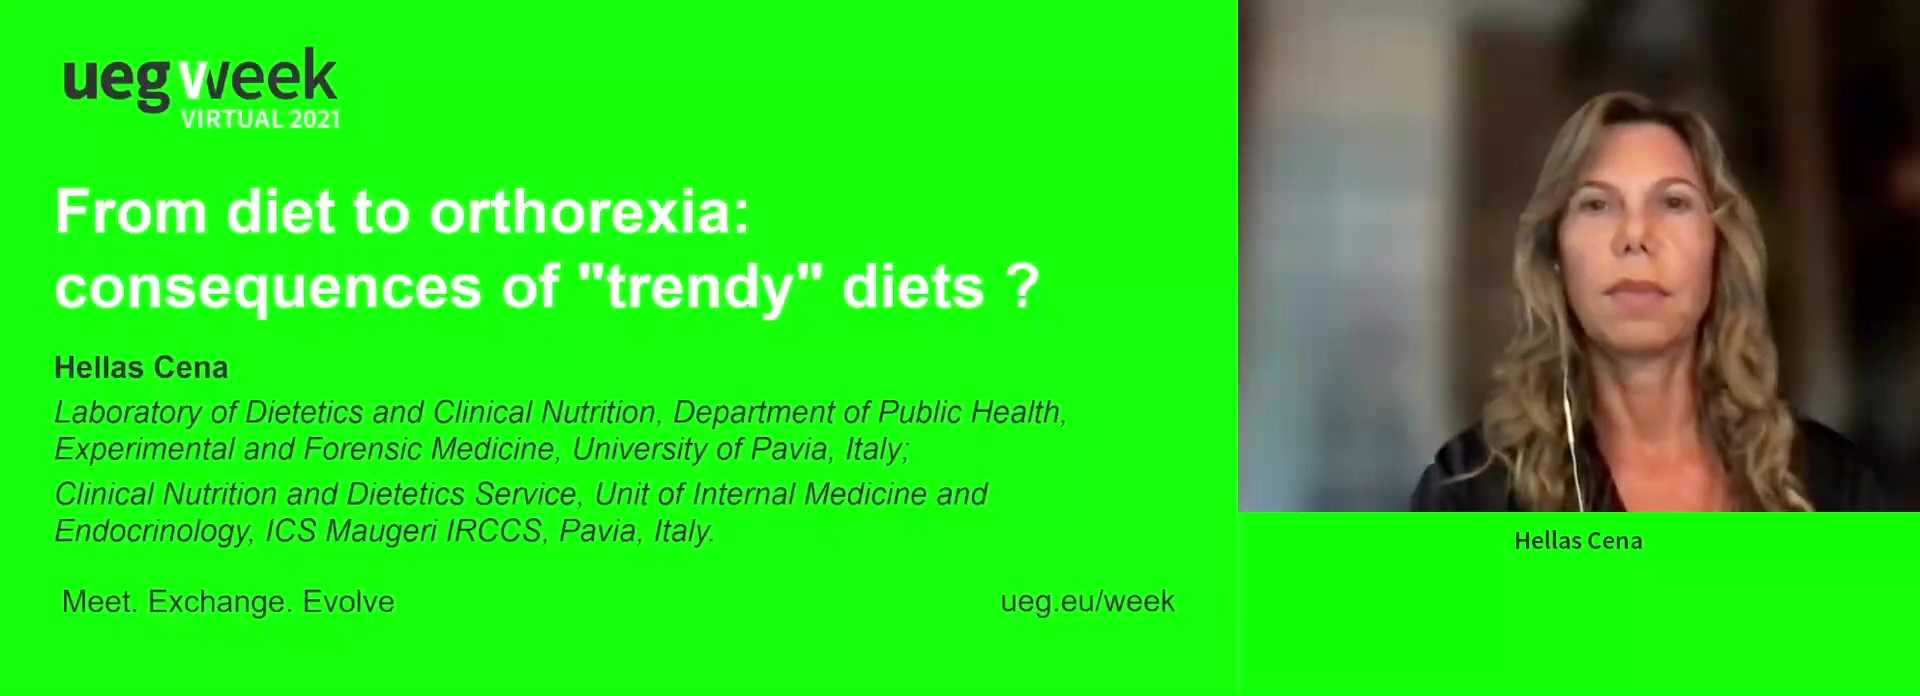 From diet to orthorexia: Consequences of "trendy" diets